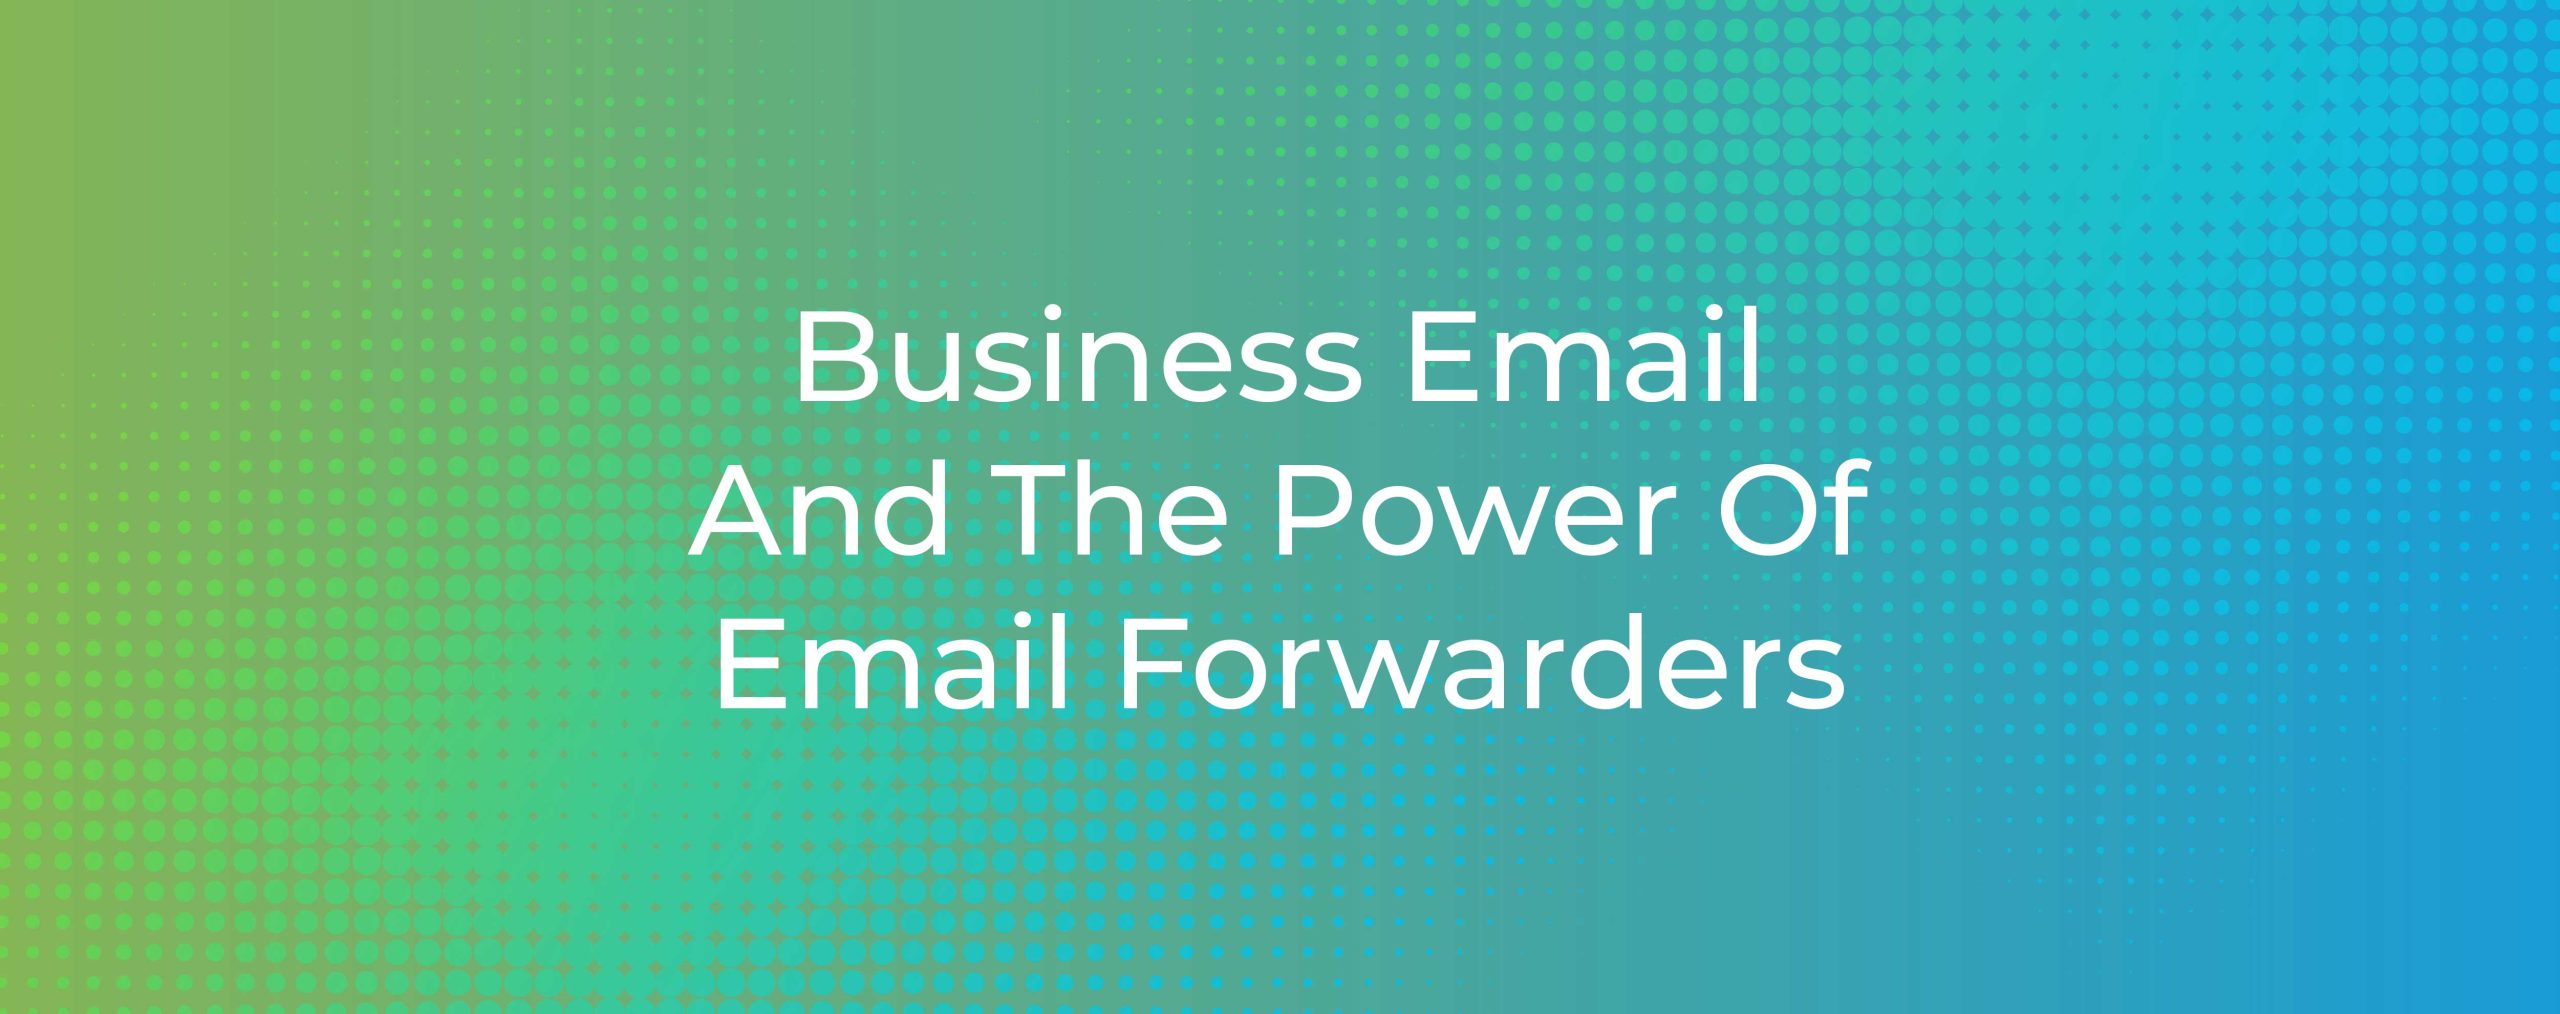 business-email-and-the-power-of-email-forwarders